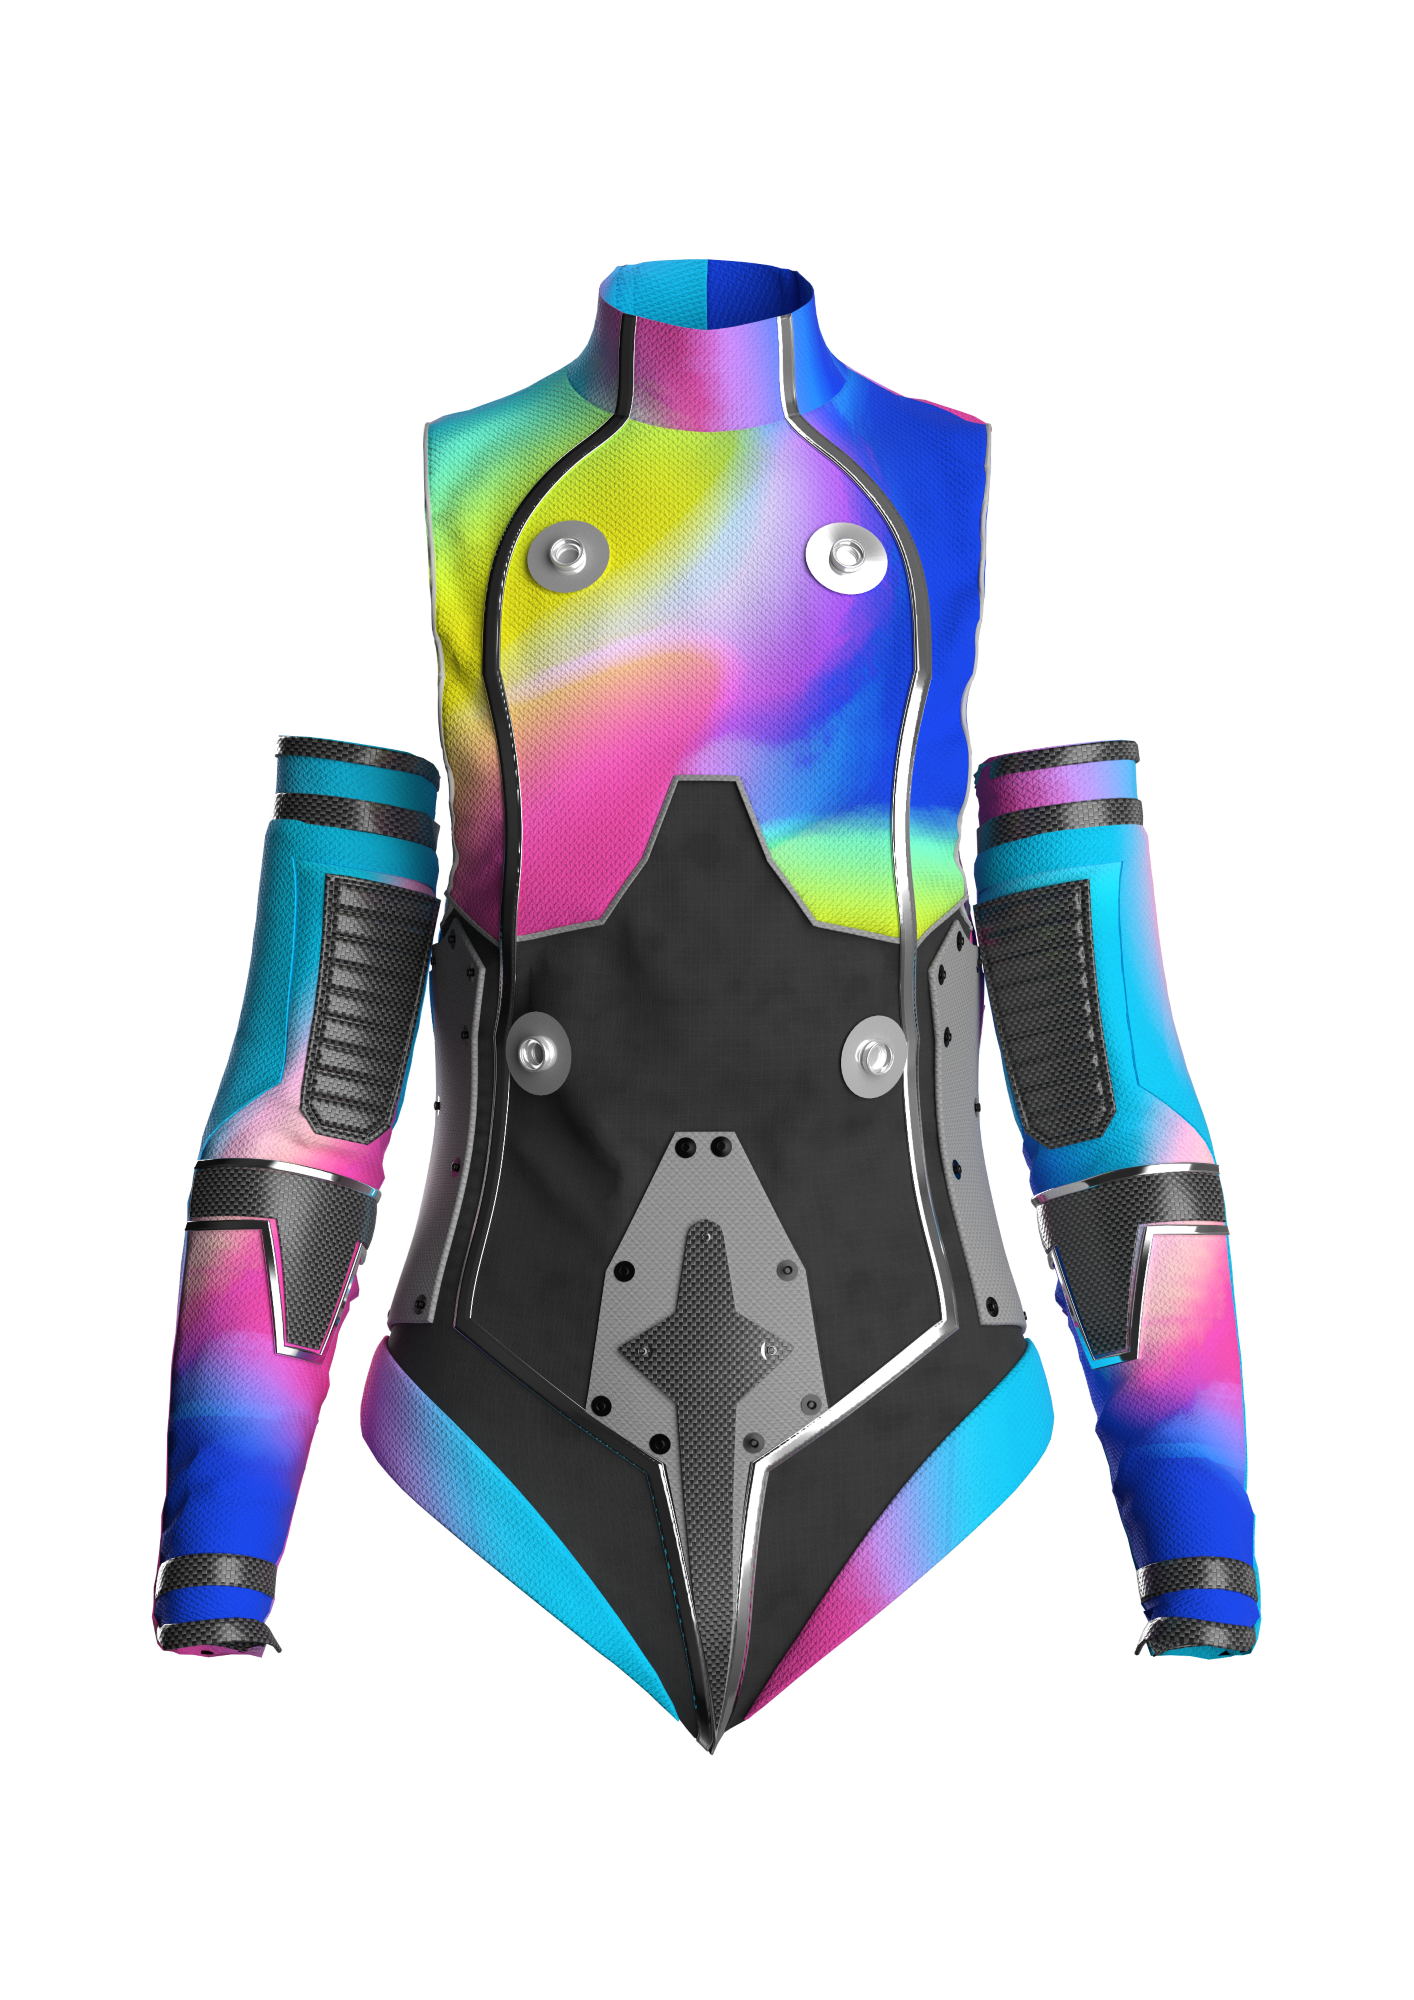  | Futuristic Body Con with Tech Sleeves Mixed